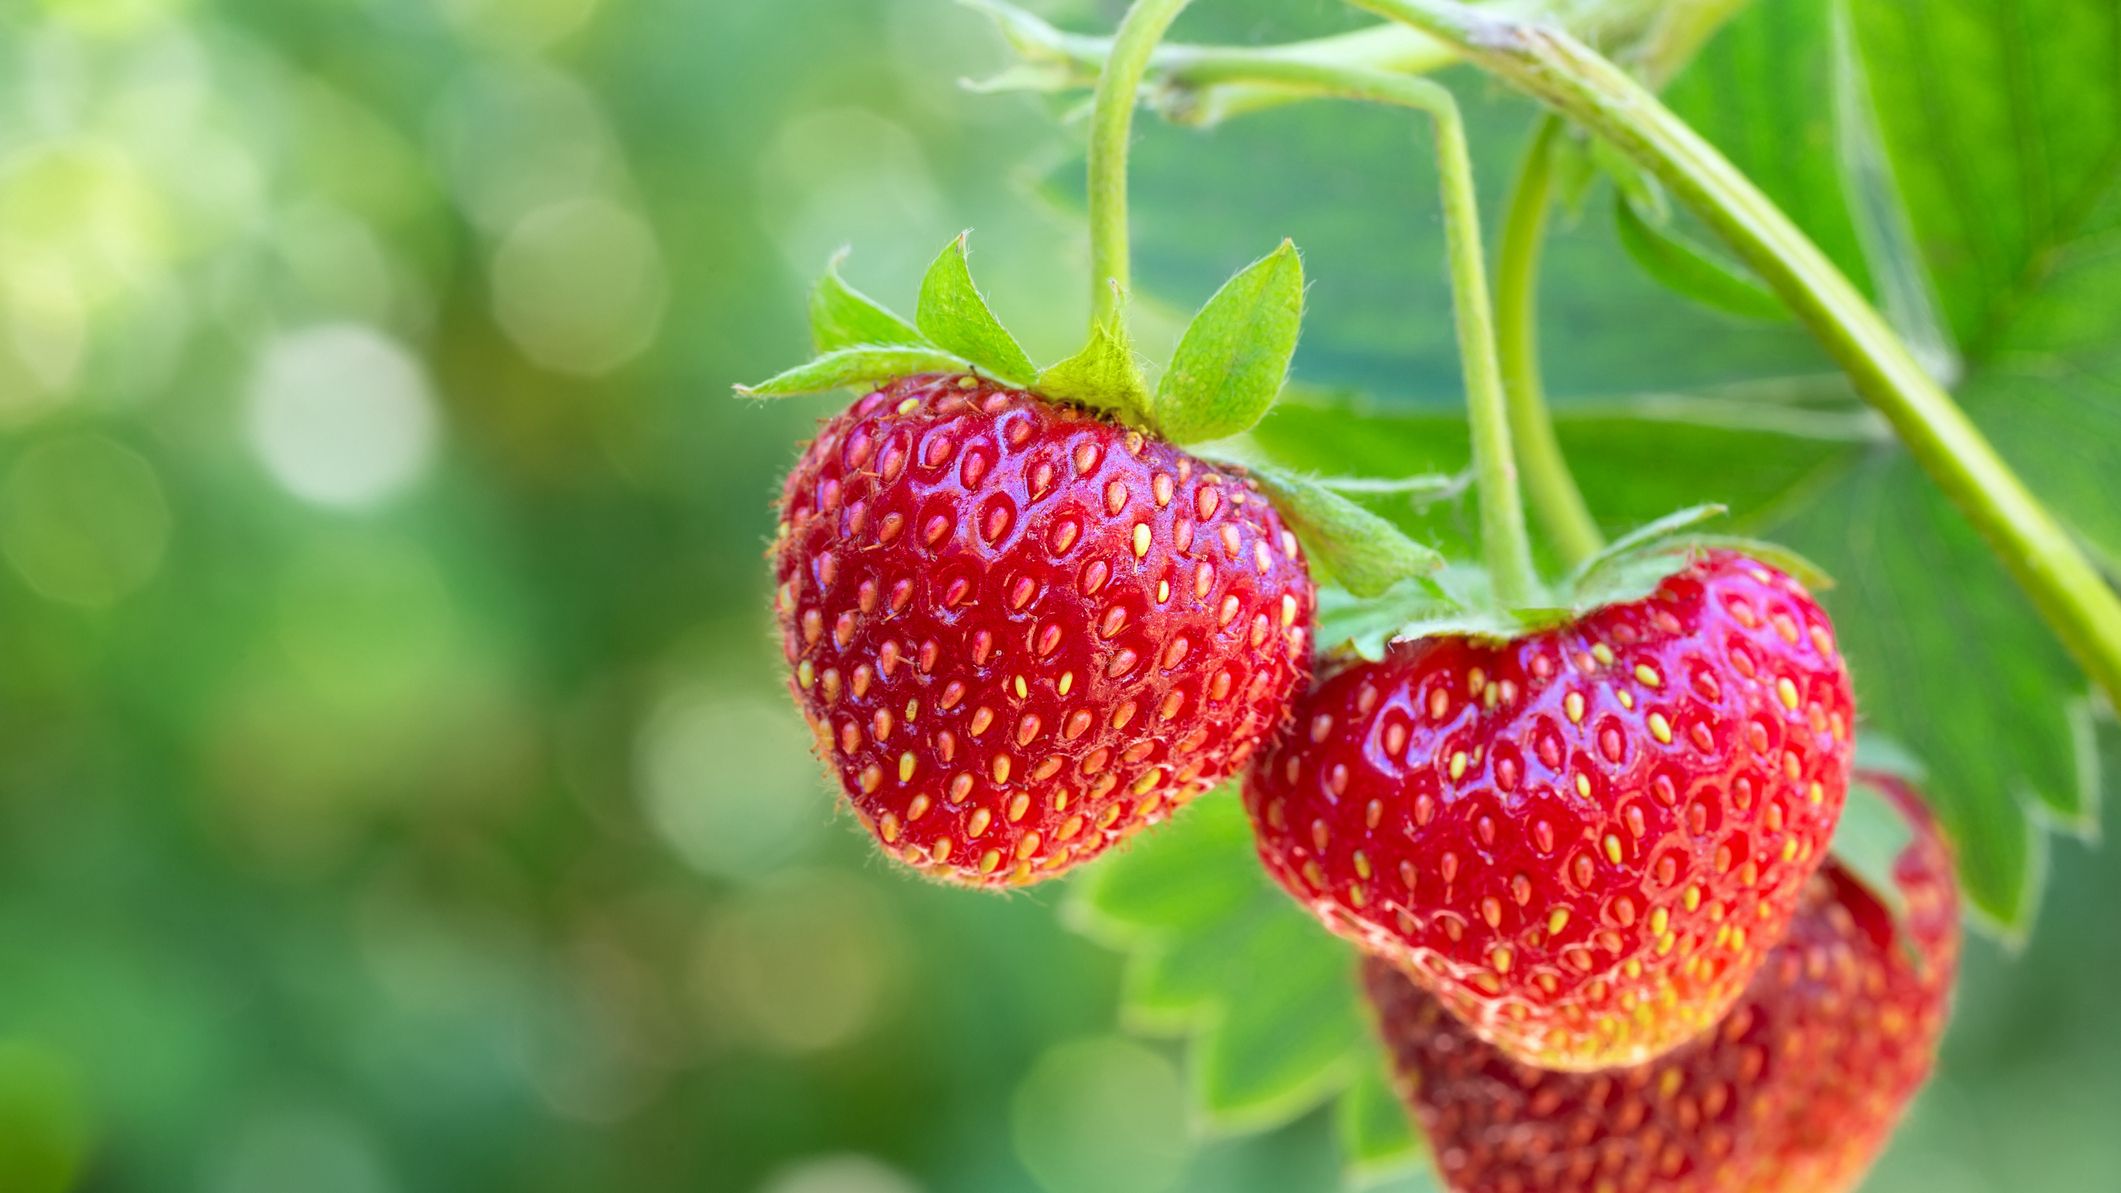 How to Grow Strawberries - Planting and Growing Strawberries